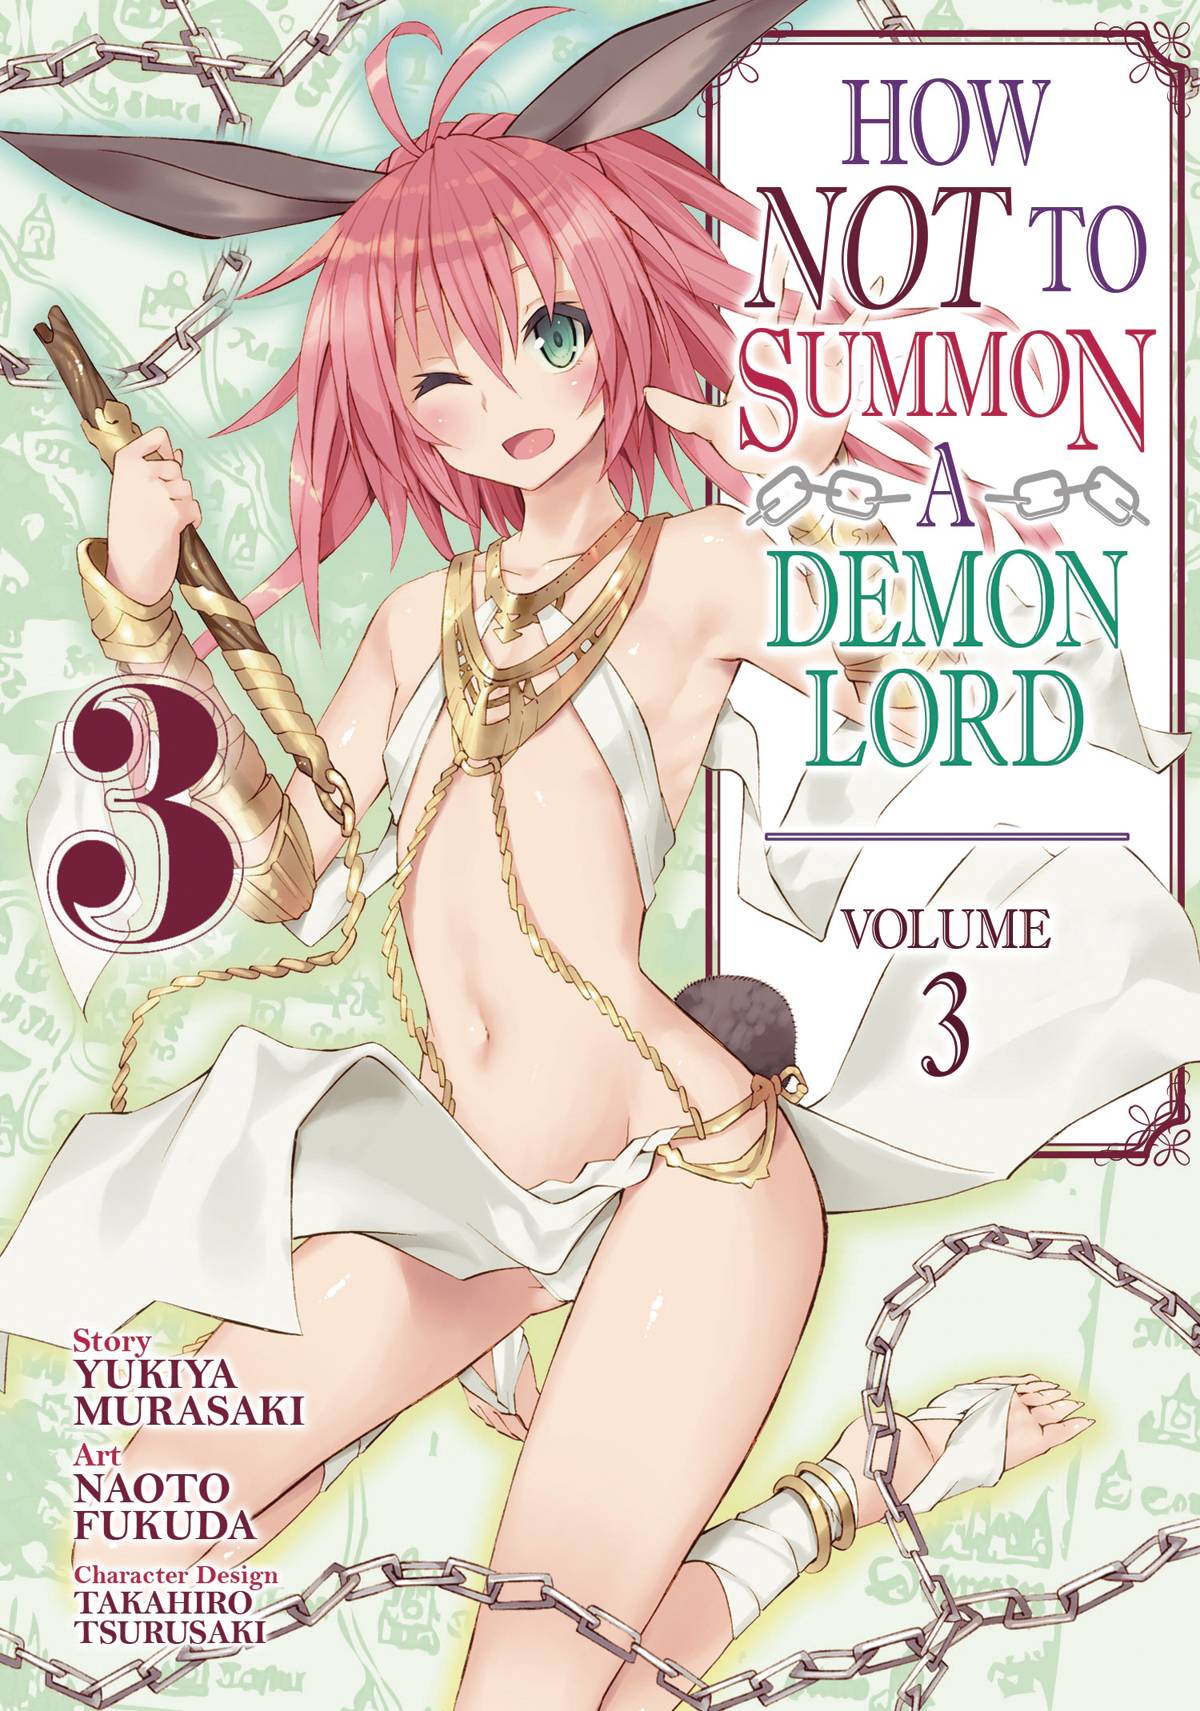 How not to Summon a Demon Lord Manga Volume 3